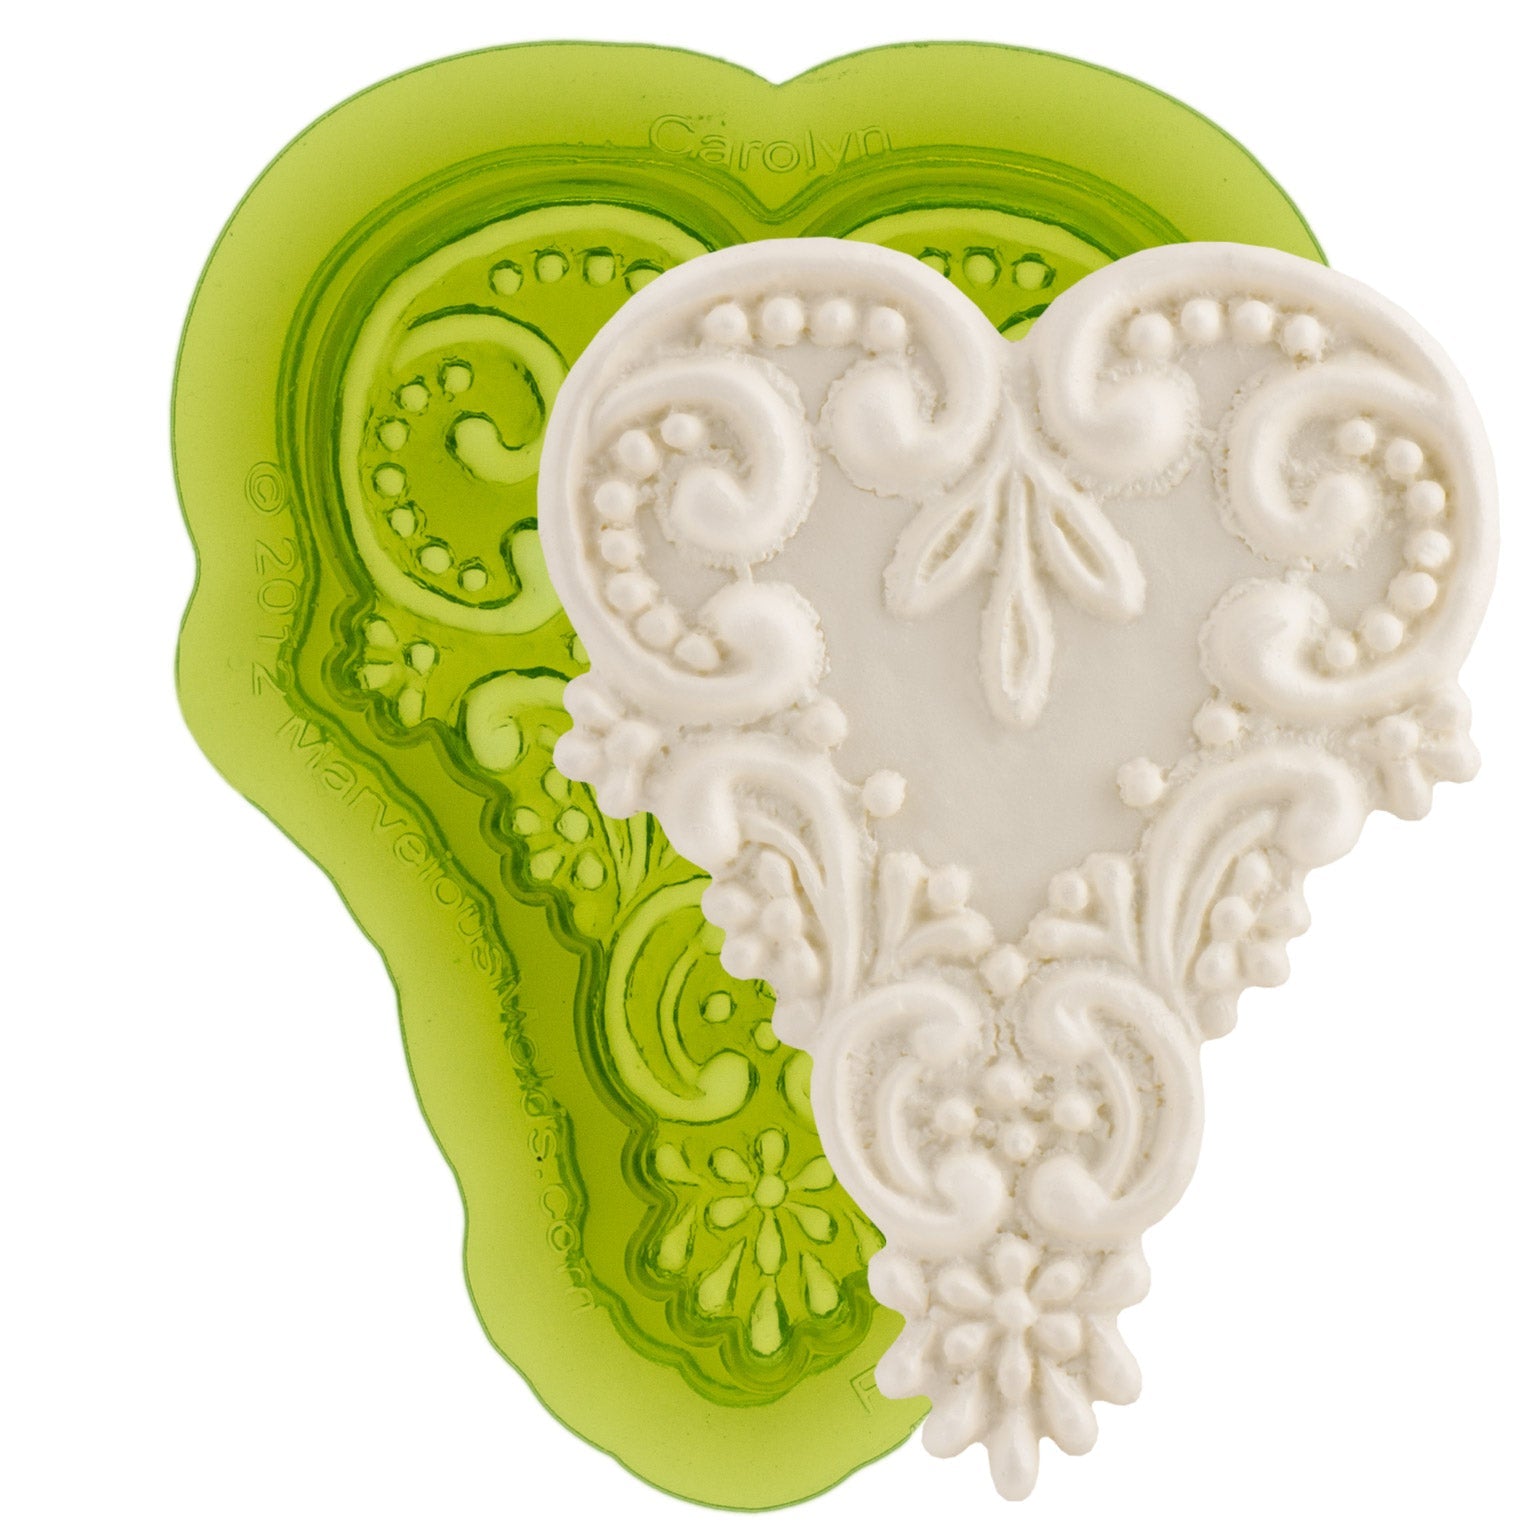 Earlene's Enhanced Lace Mandy Mold by Marvelous Molds 